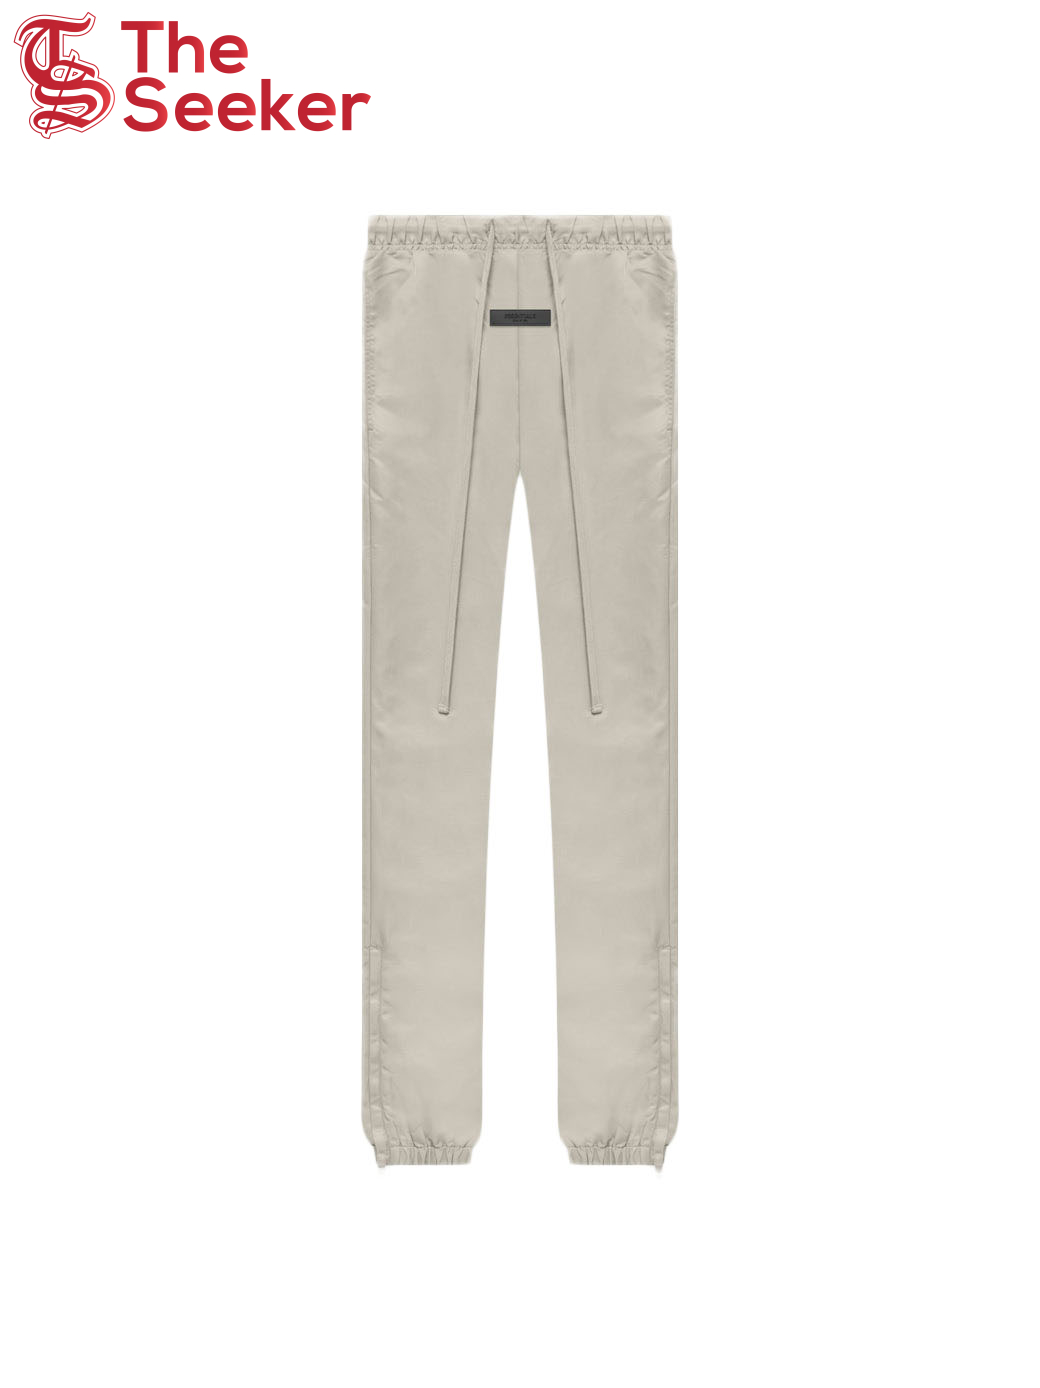 Fear of God Essentials Track Pant Smoke